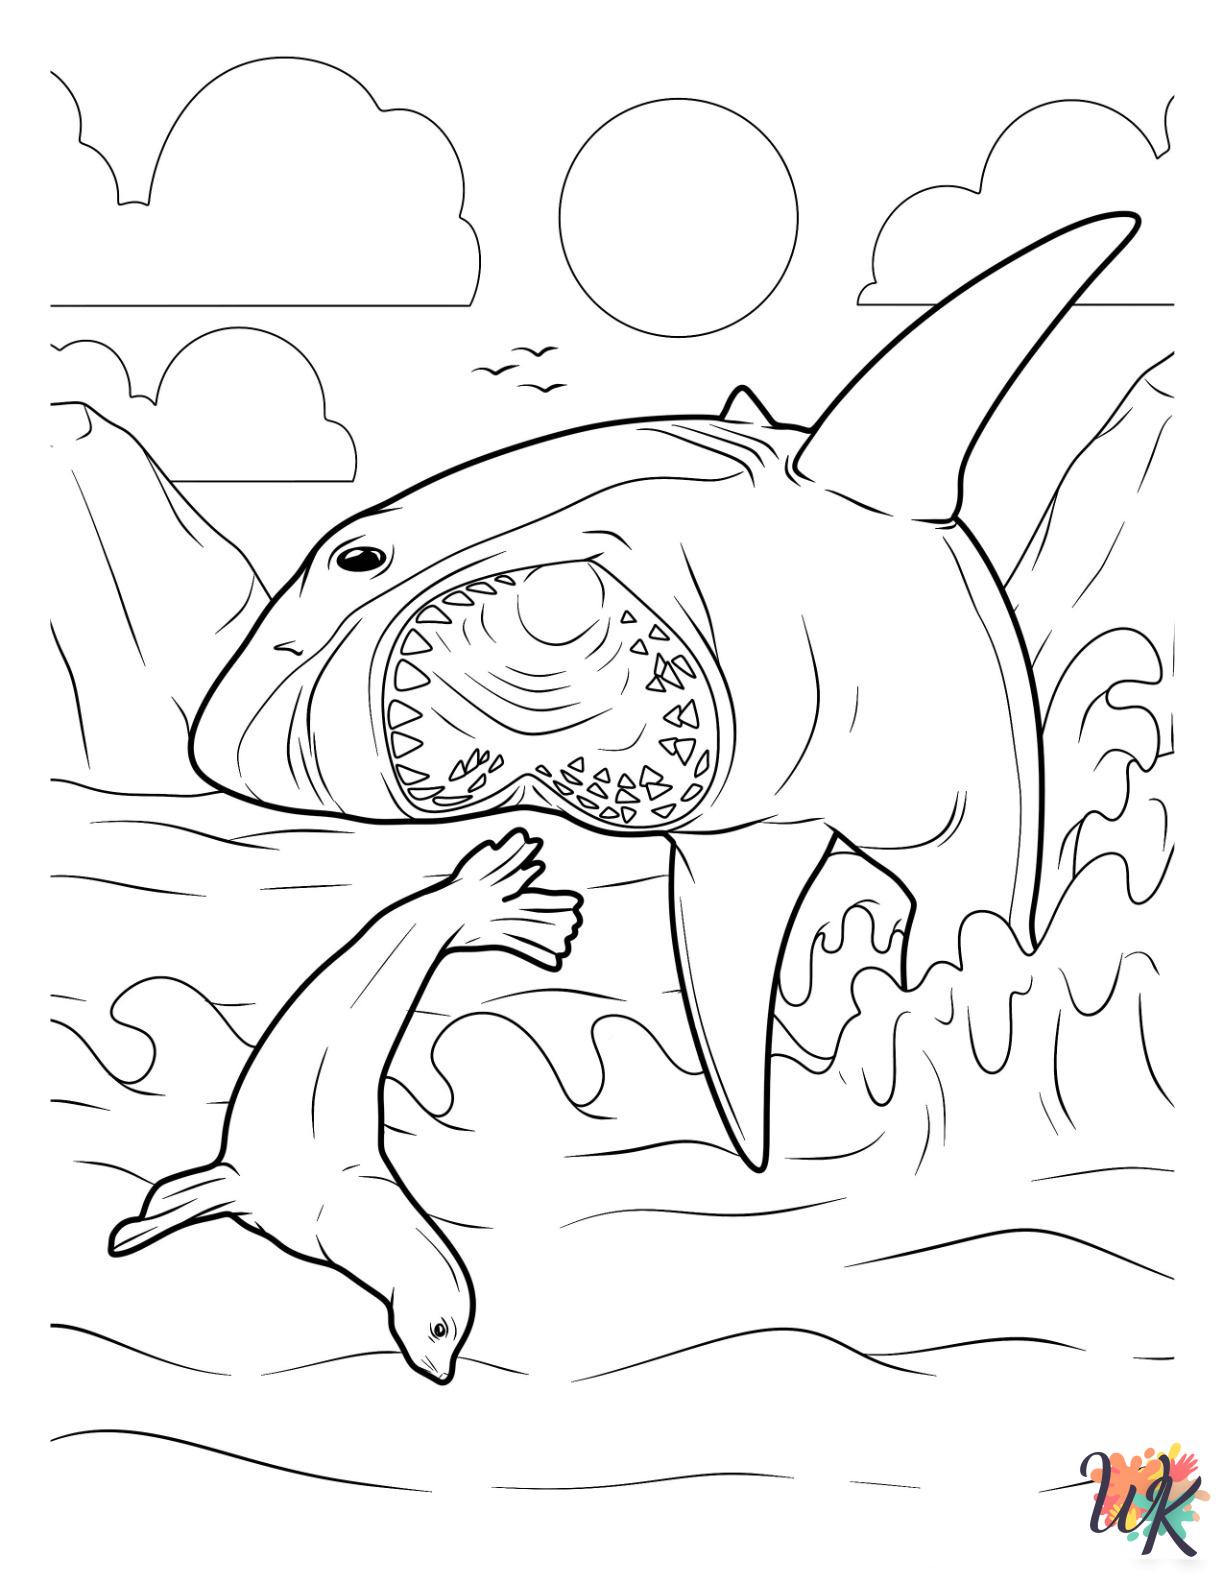 Shark coloring pages easy